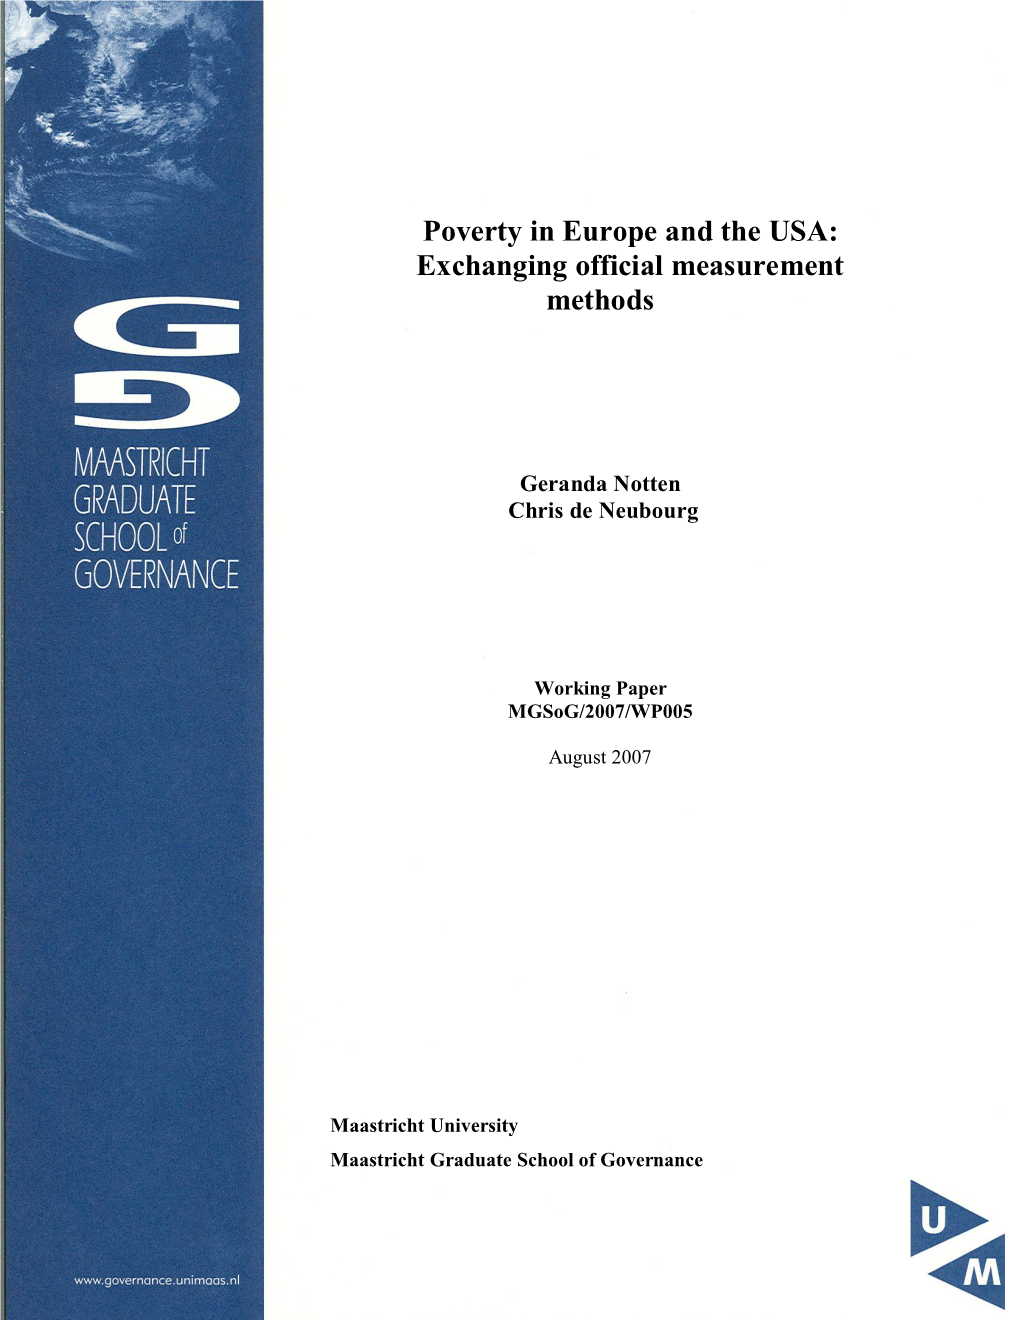 Poverty in Europe and the USA: Exchanging Official Measurement Methods